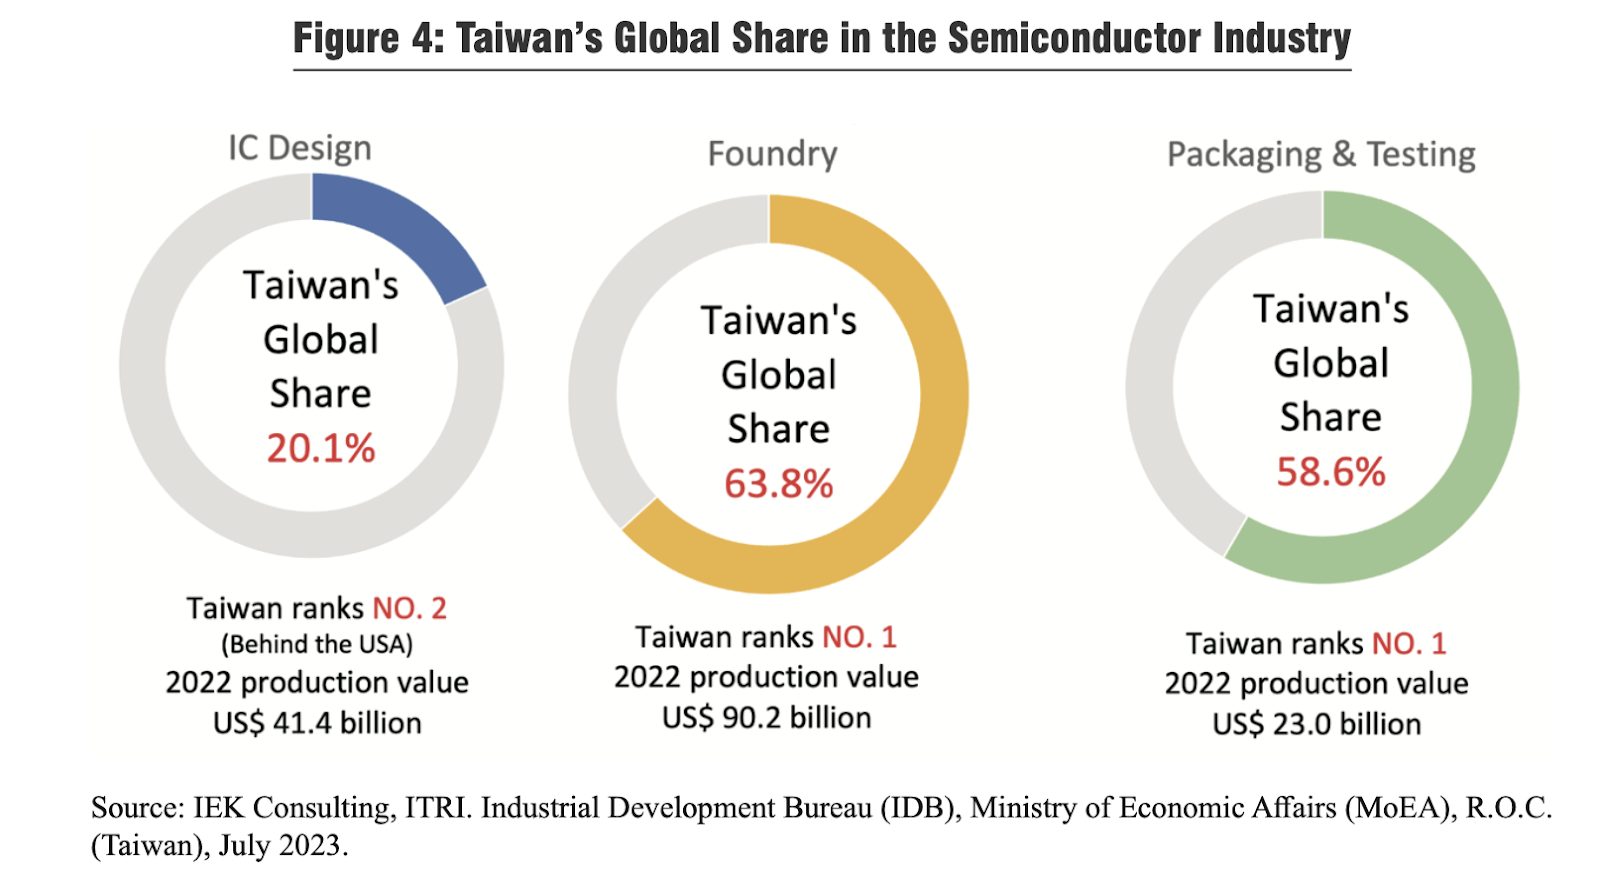 Taiwan's share in the semiconductor industry 